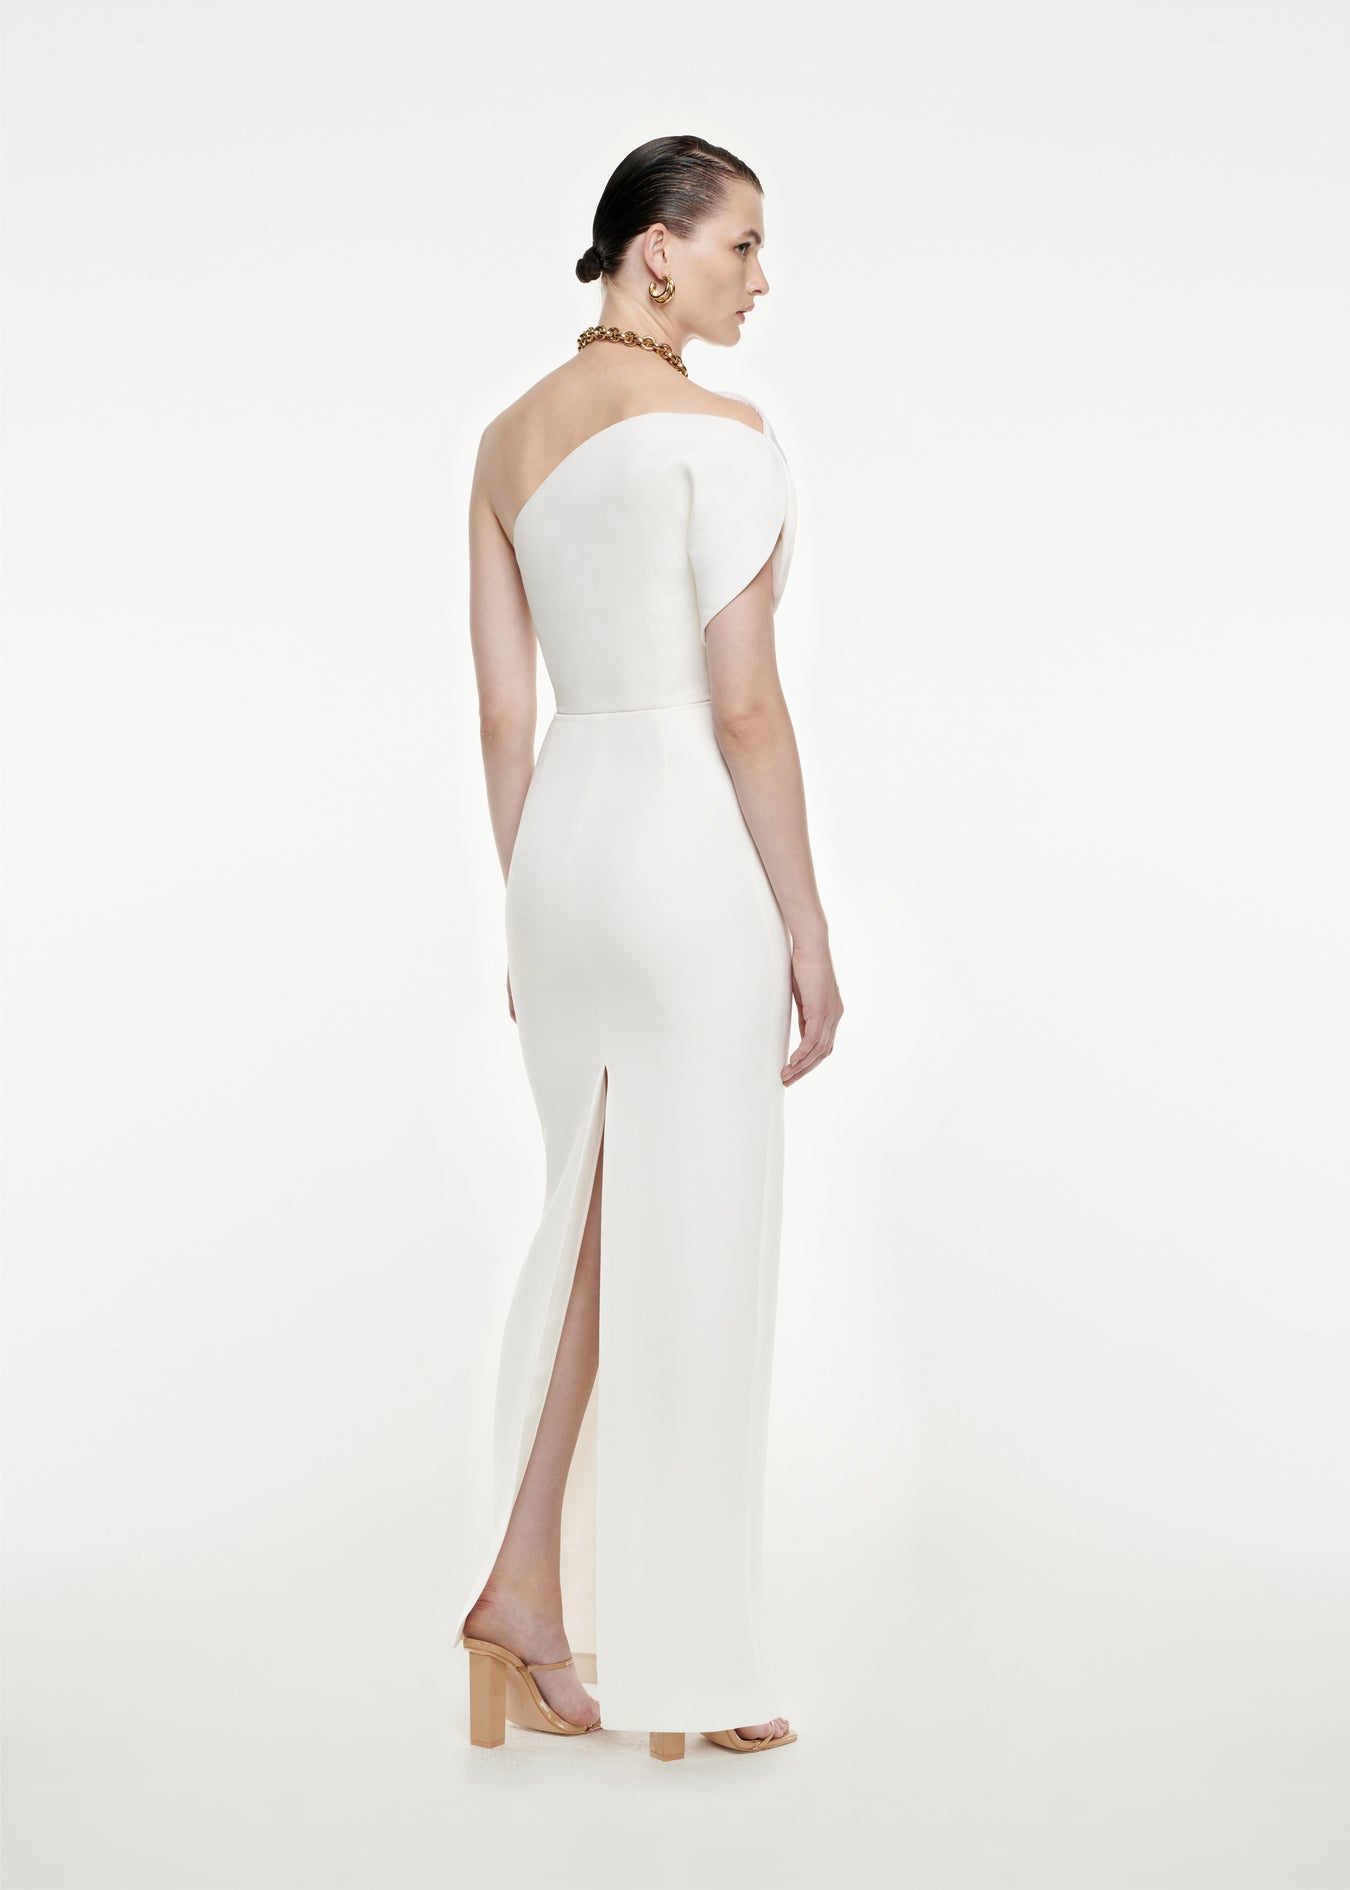 The back of a woman wearing the Asymmetric Silk Wool Maxi Dress in White